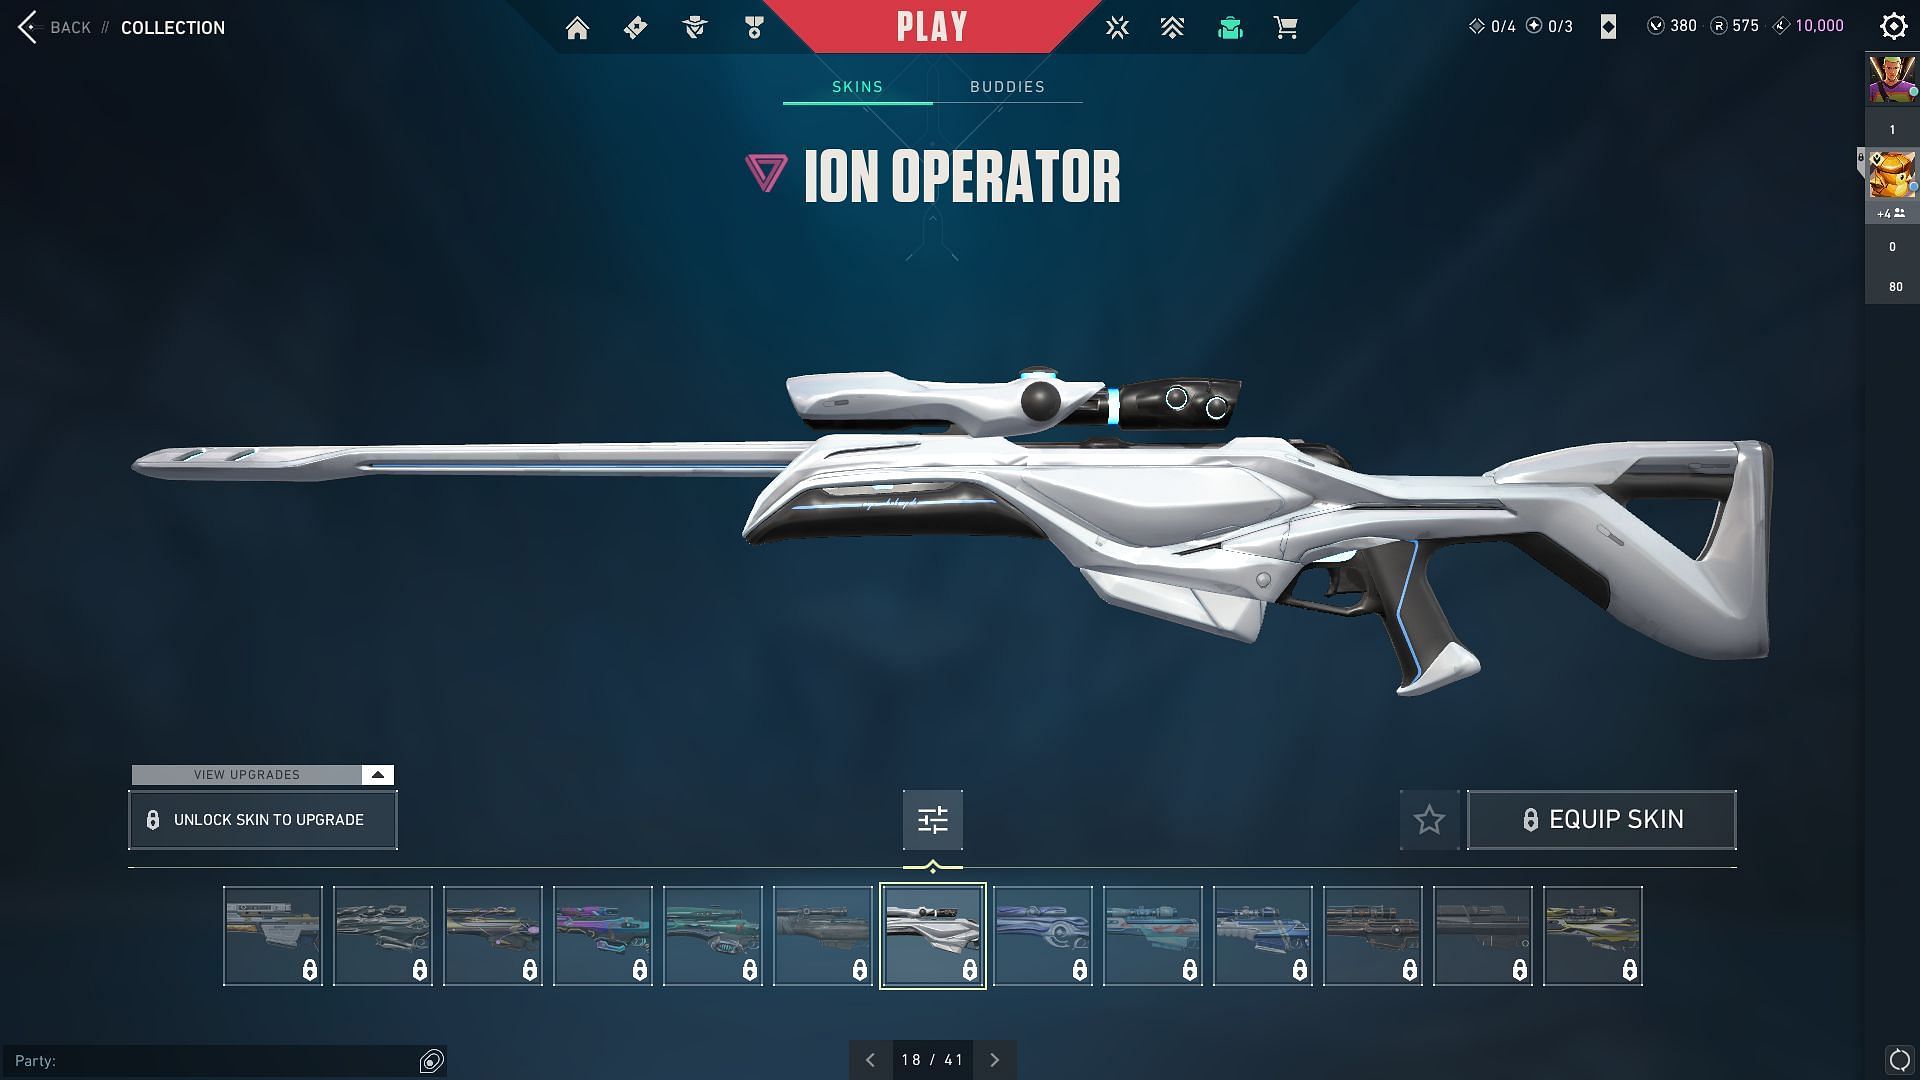 Ion Operator(image by Riot Games)